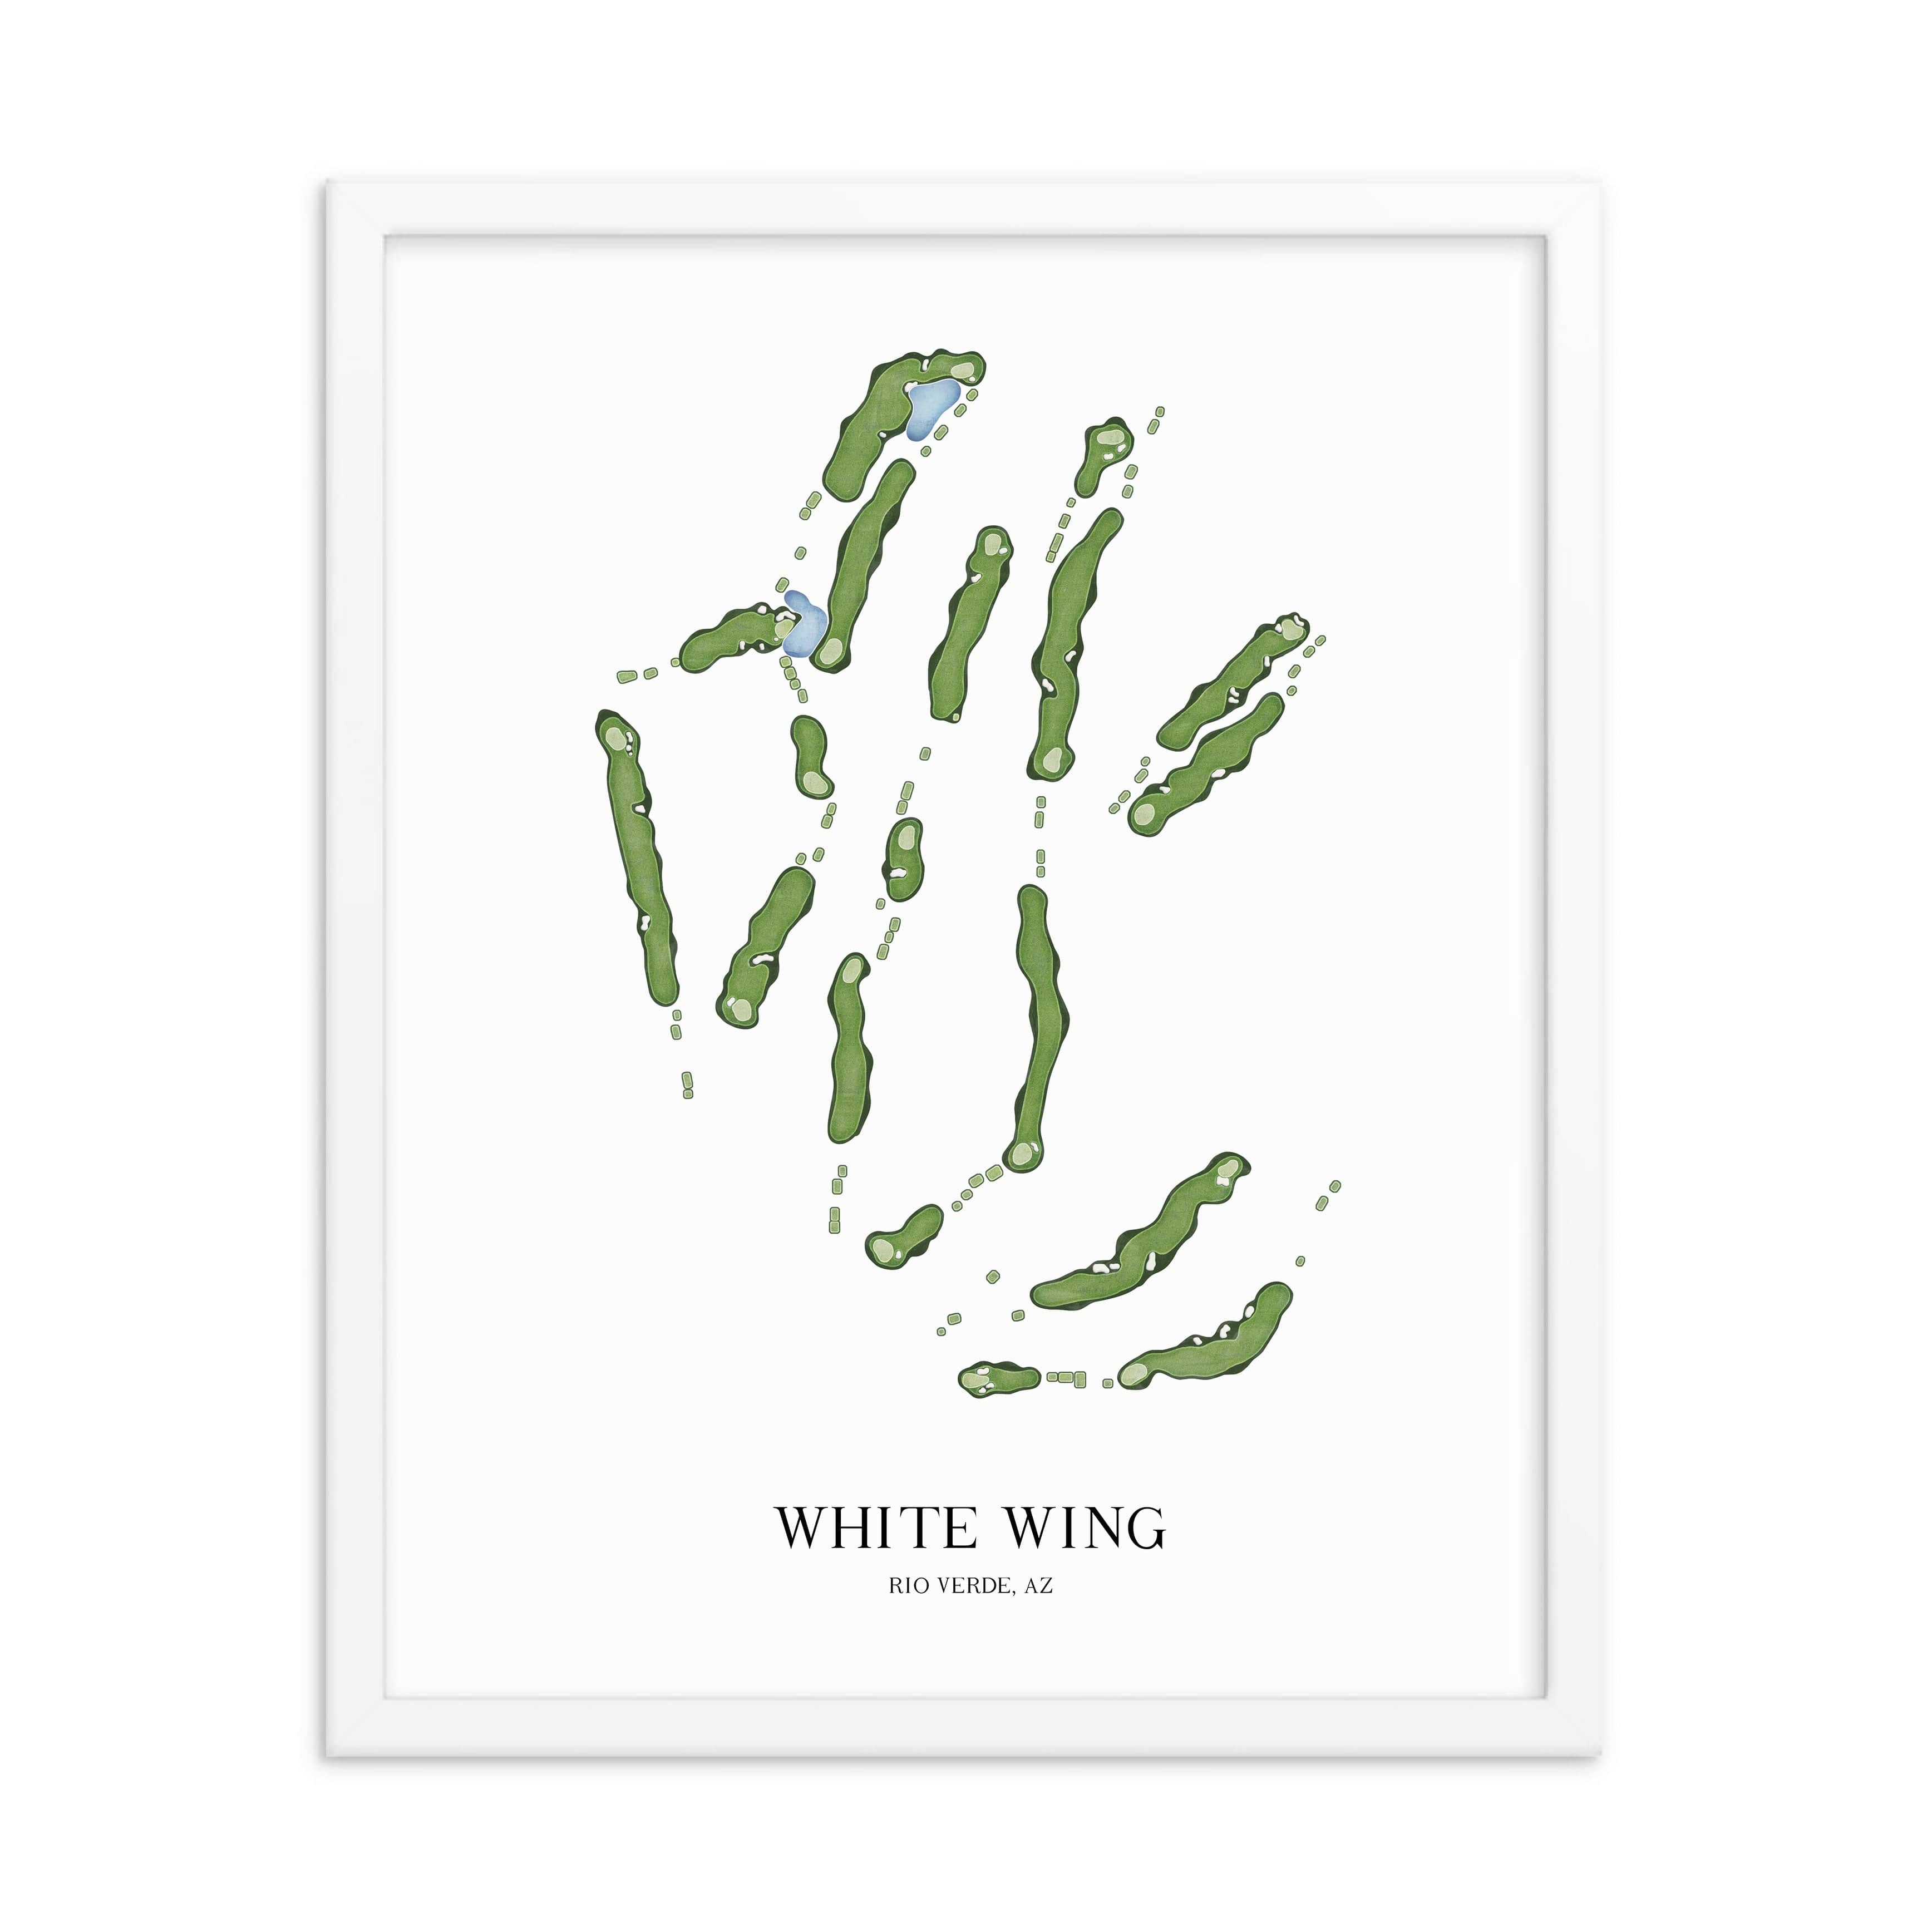 The 19th Hole Golf Shop - Golf Course Prints -  White Wing Golf Course Map